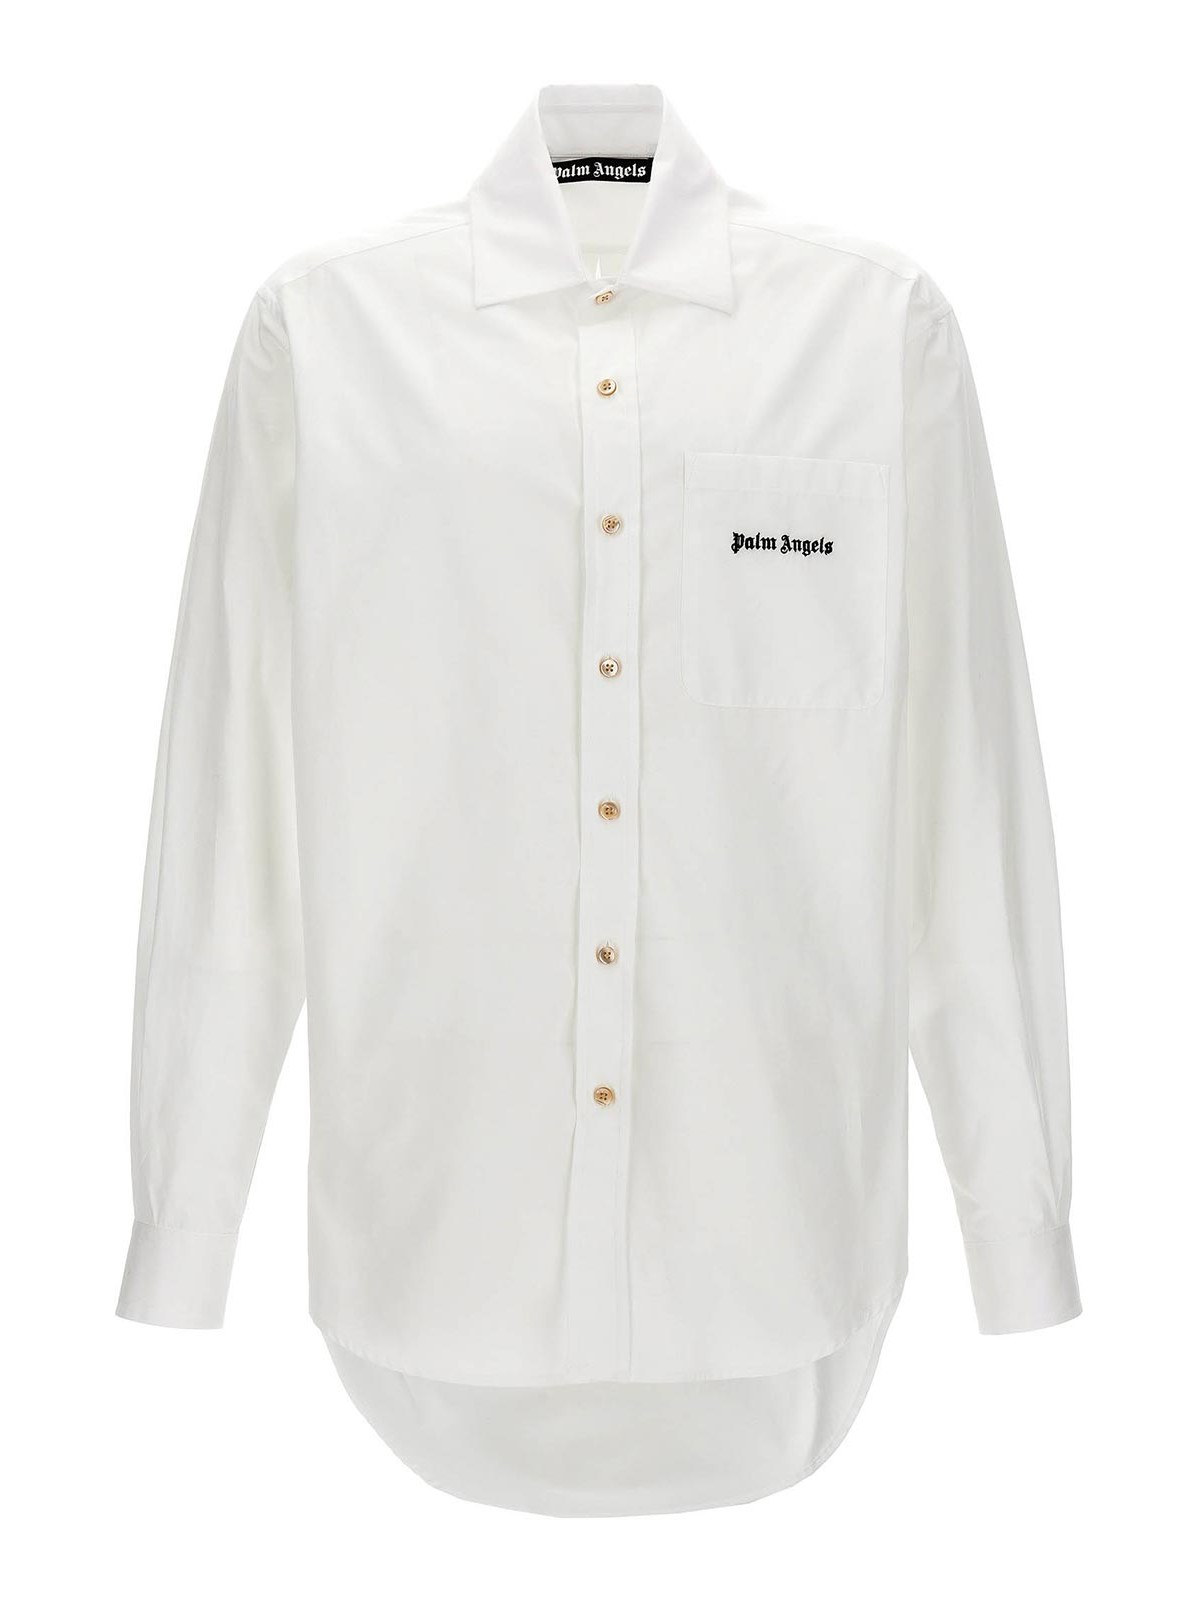 Palm Angels Shirt In White